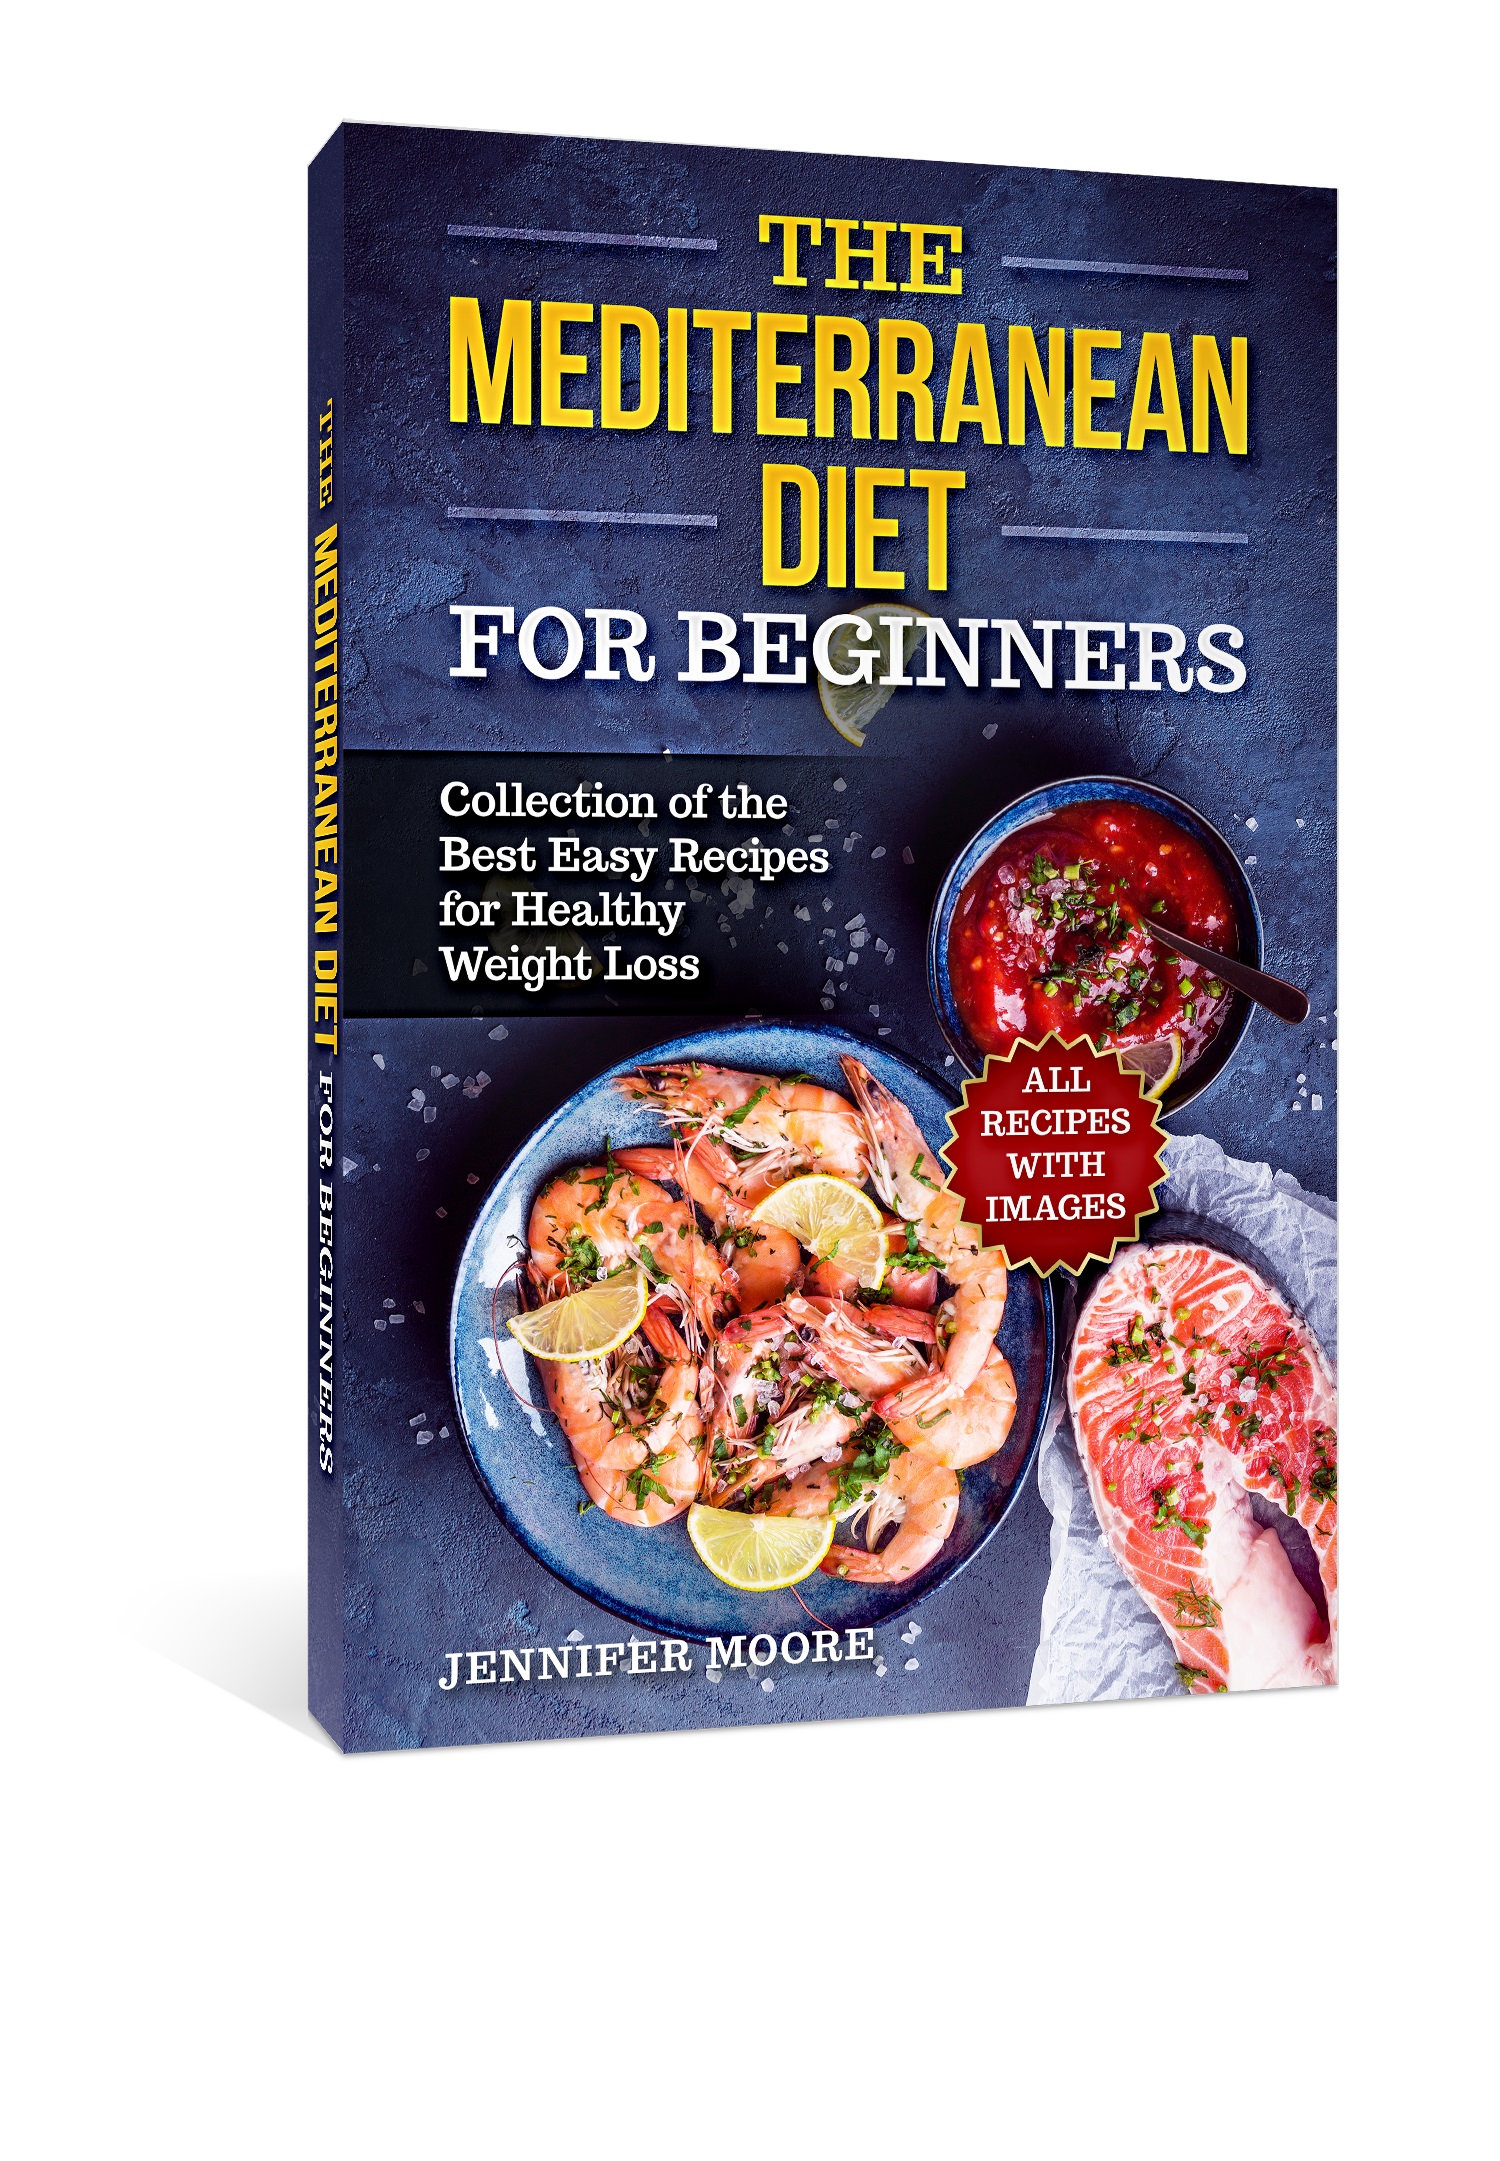 FREE: The Mediterranean Diet for Beginners by Jennifer Moore